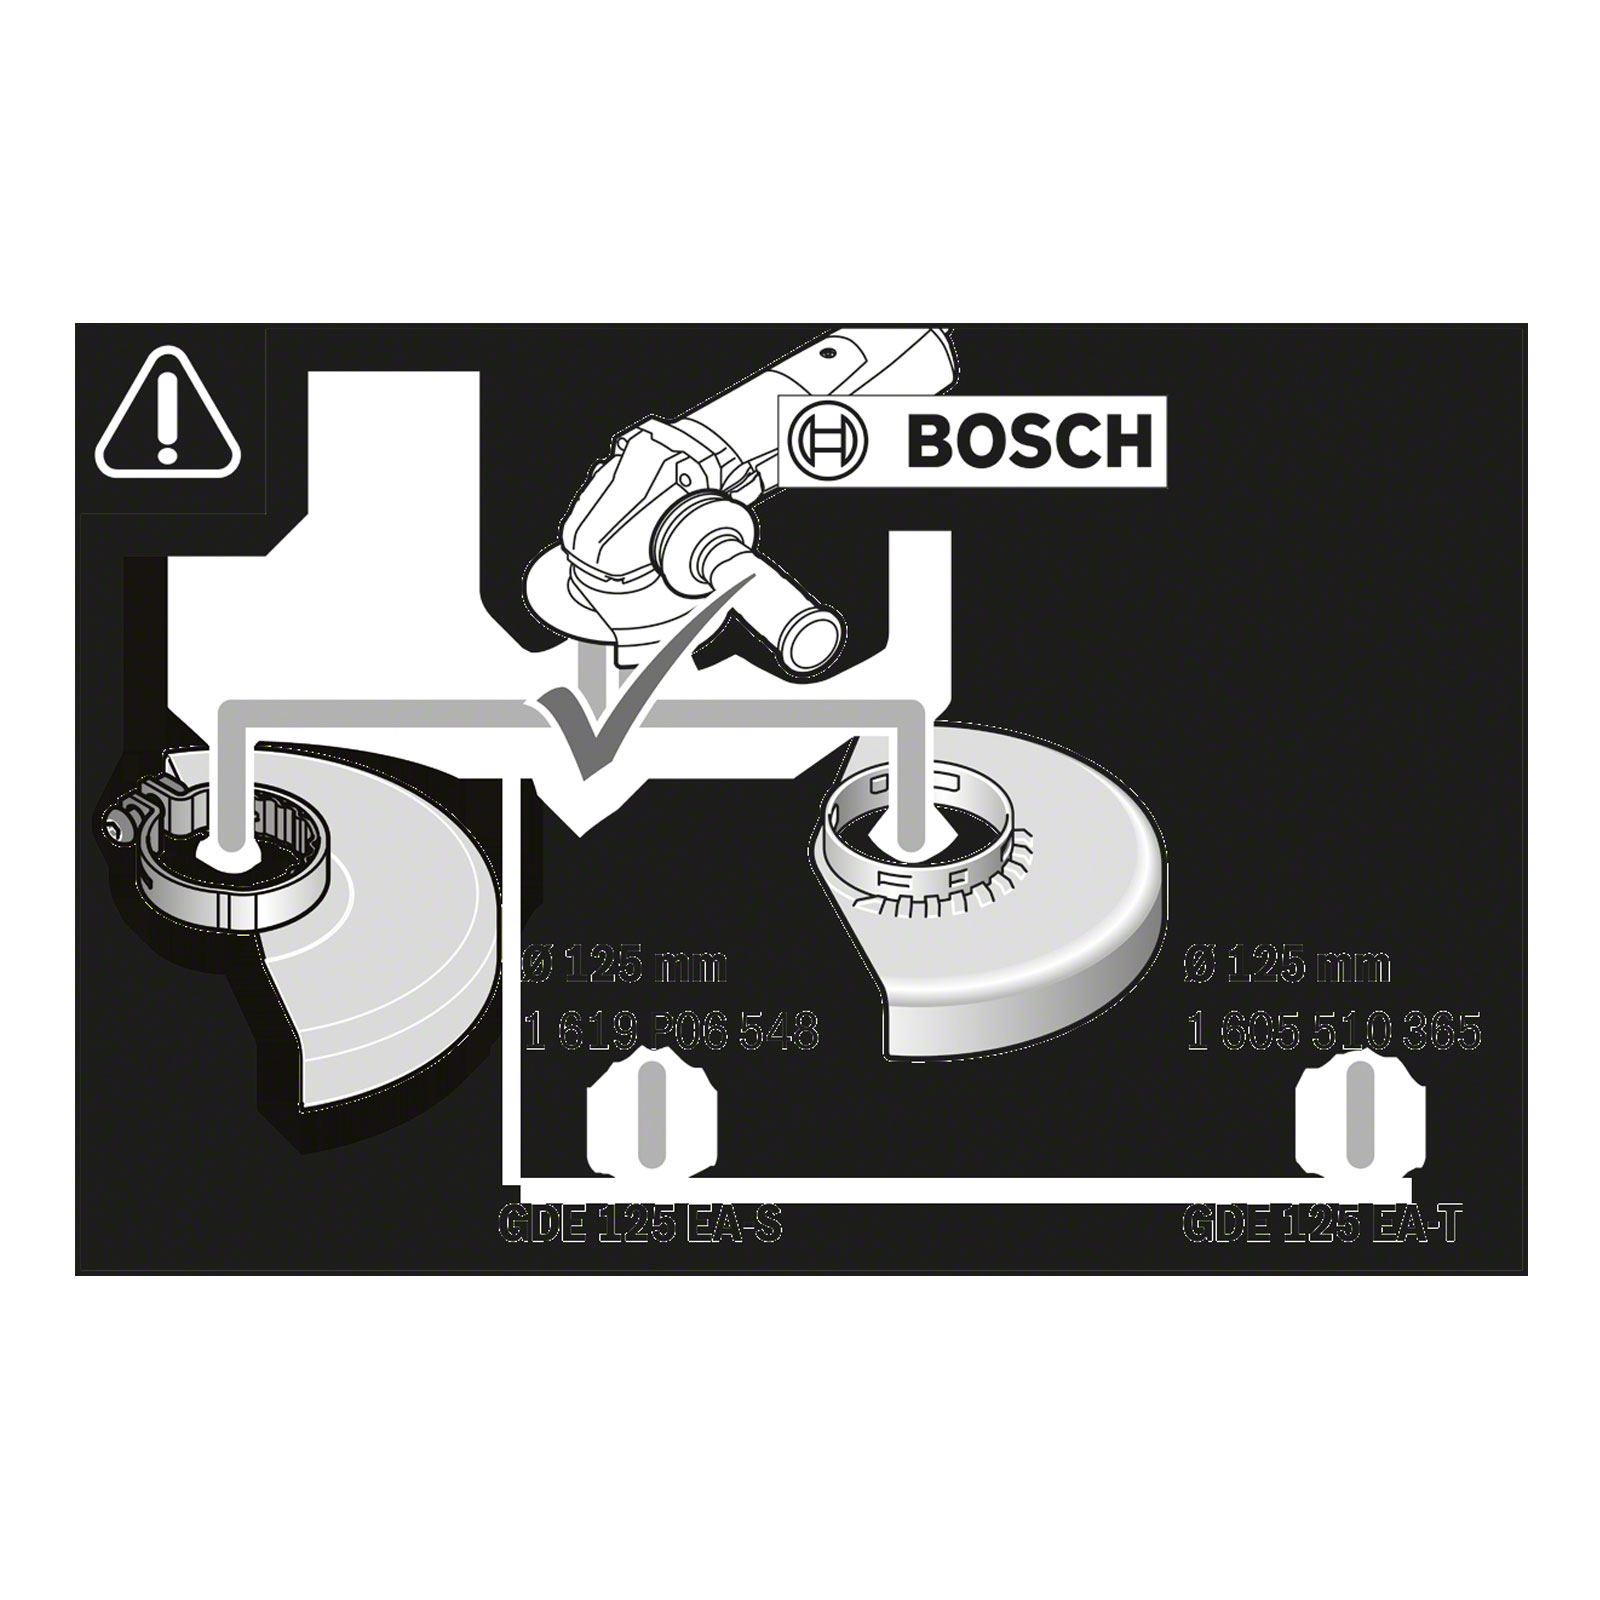 Bosch Professional Absaughaube Easy-Adjust GDE 125 EA-T, Systemzubehoer